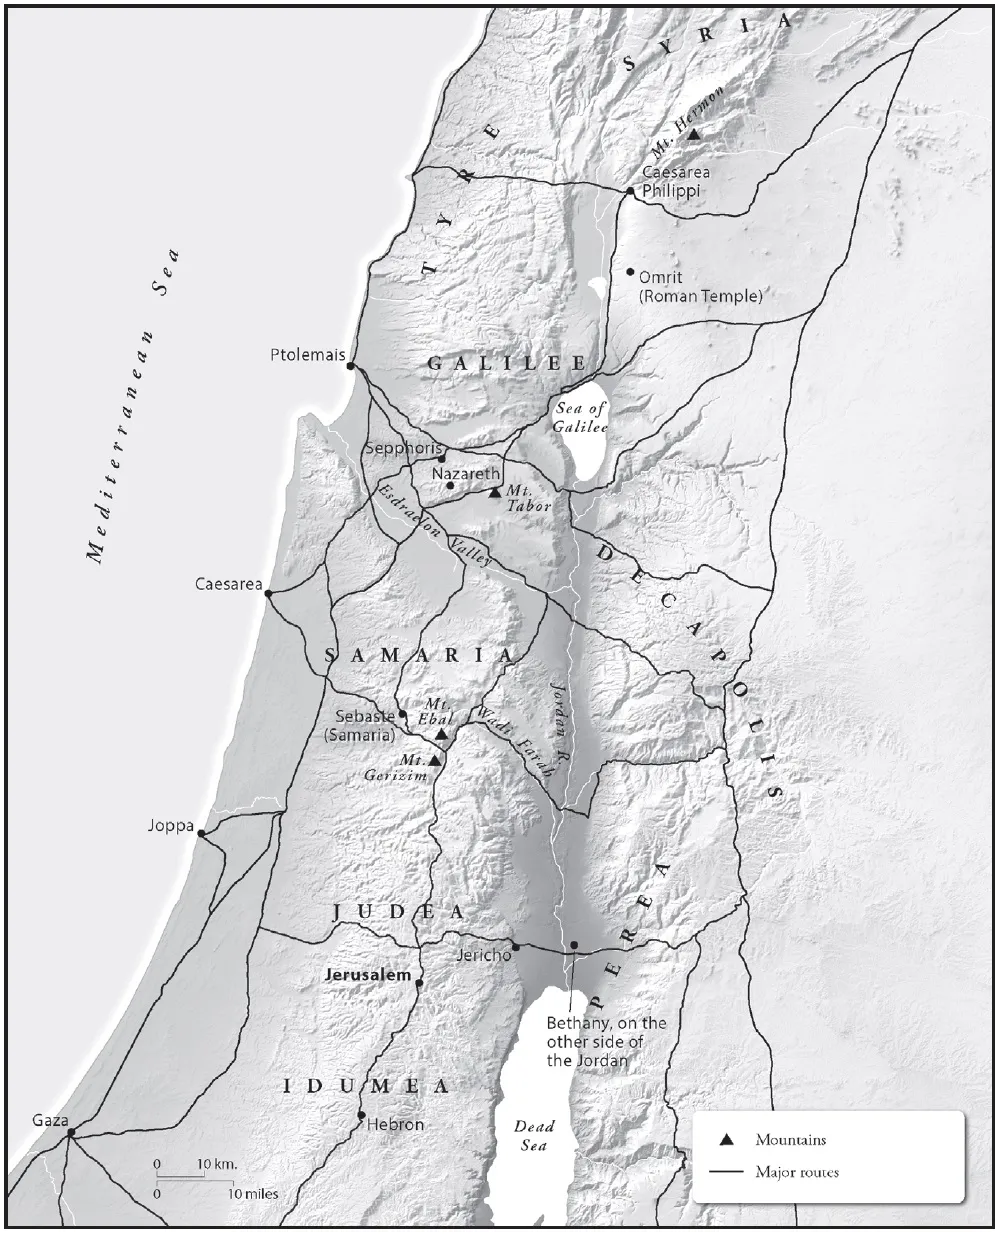 Major roads in Palestine at the time of Jesus’ ministry